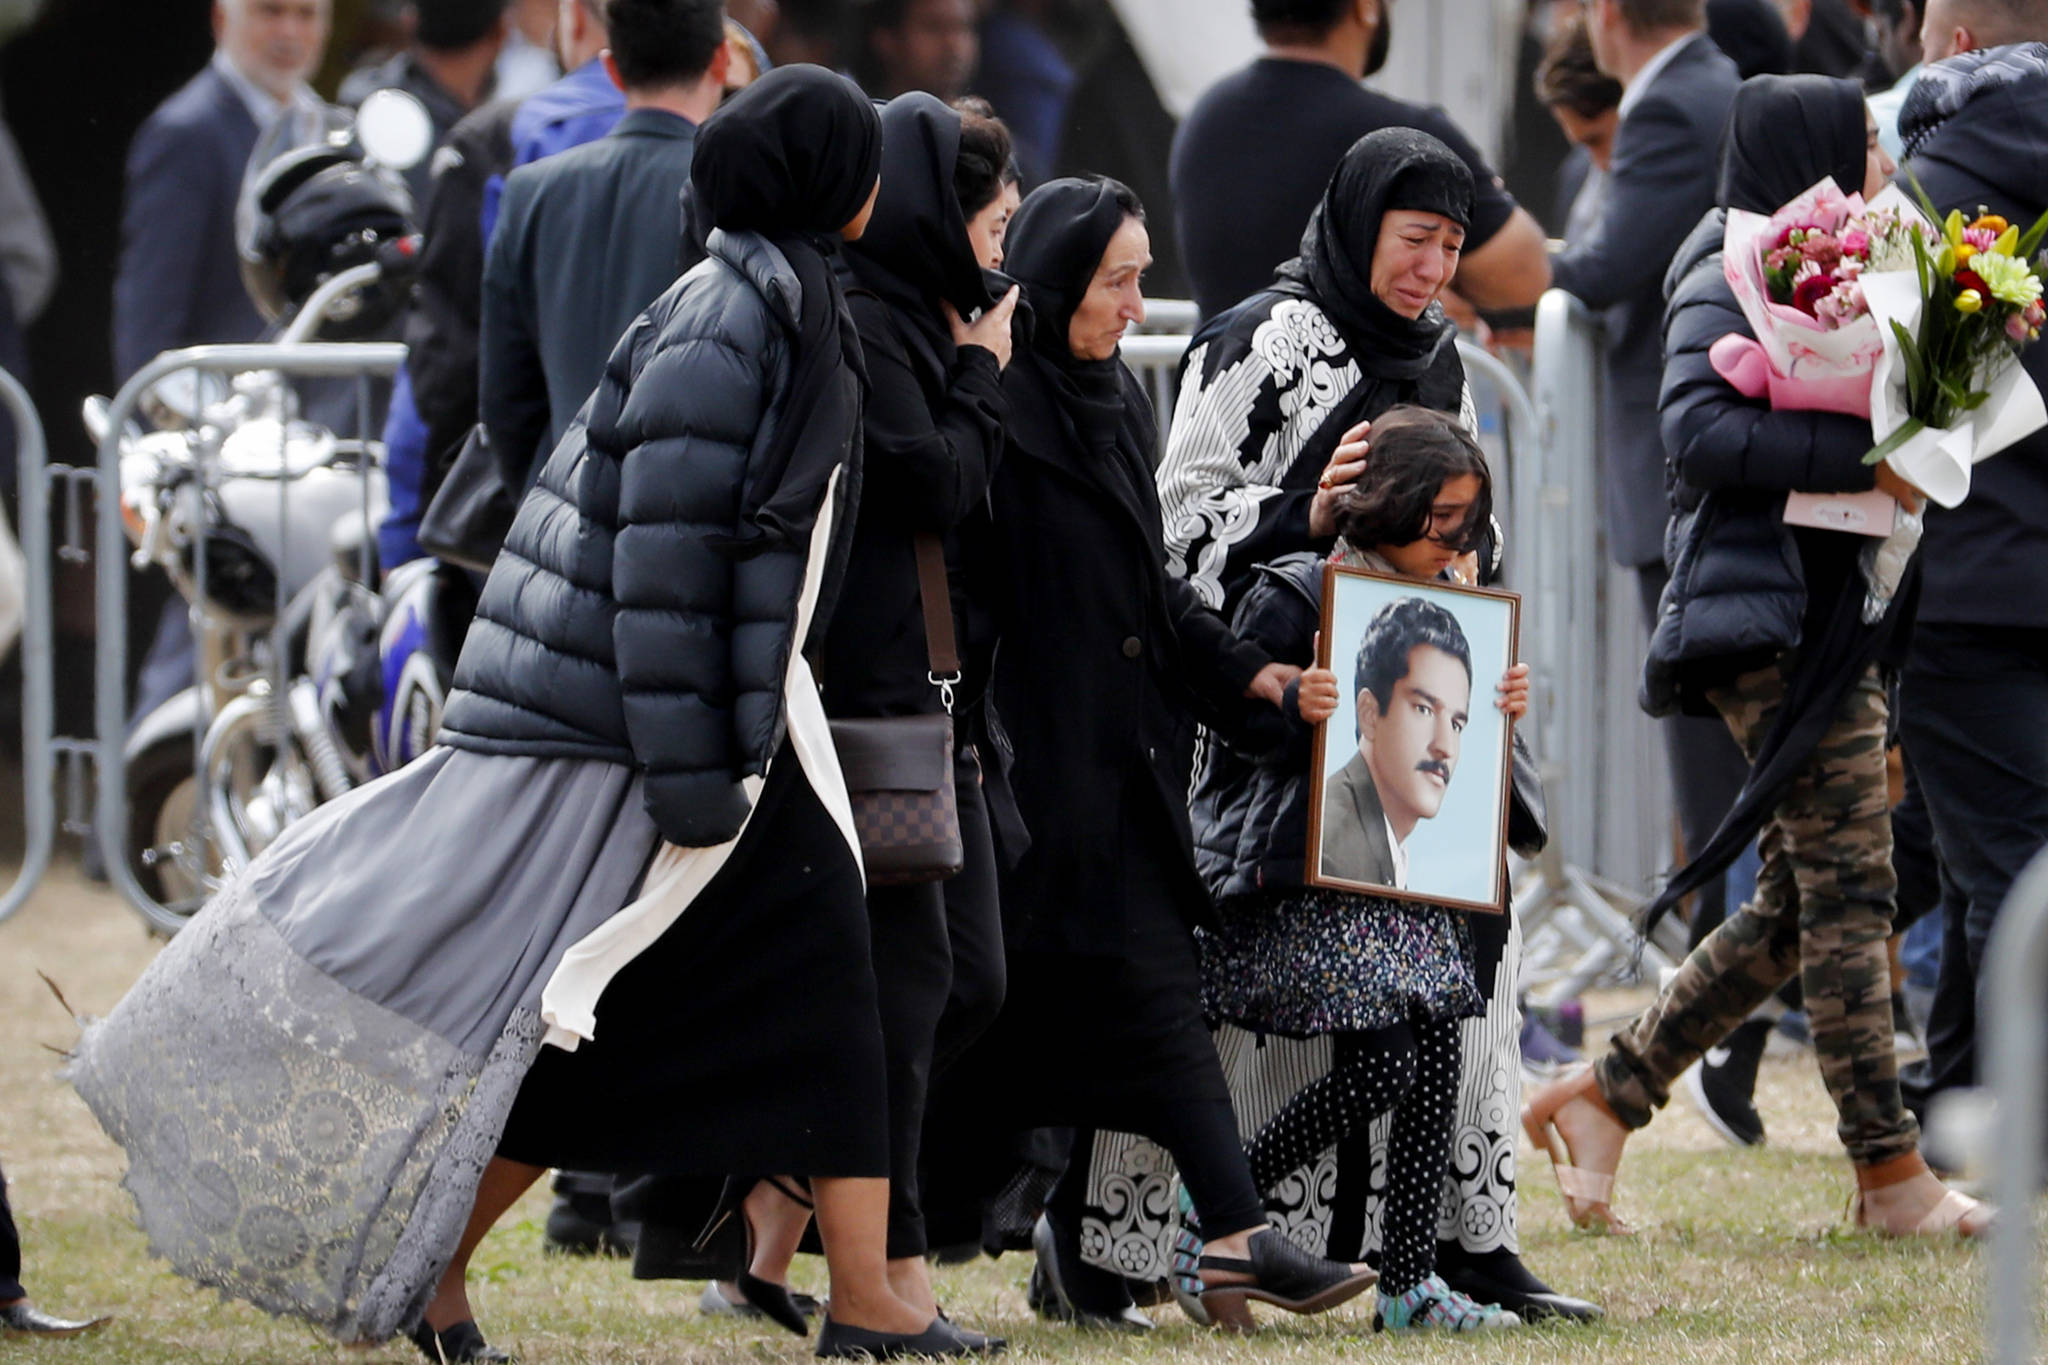 Mourners arrive for a burial service of a victim from the March 15 mosque shootings at the Memorial Park Cemetery in Christchurch, New Zealand on Thursday, March 21, 2019. (Vincent Thian | Associated Press)